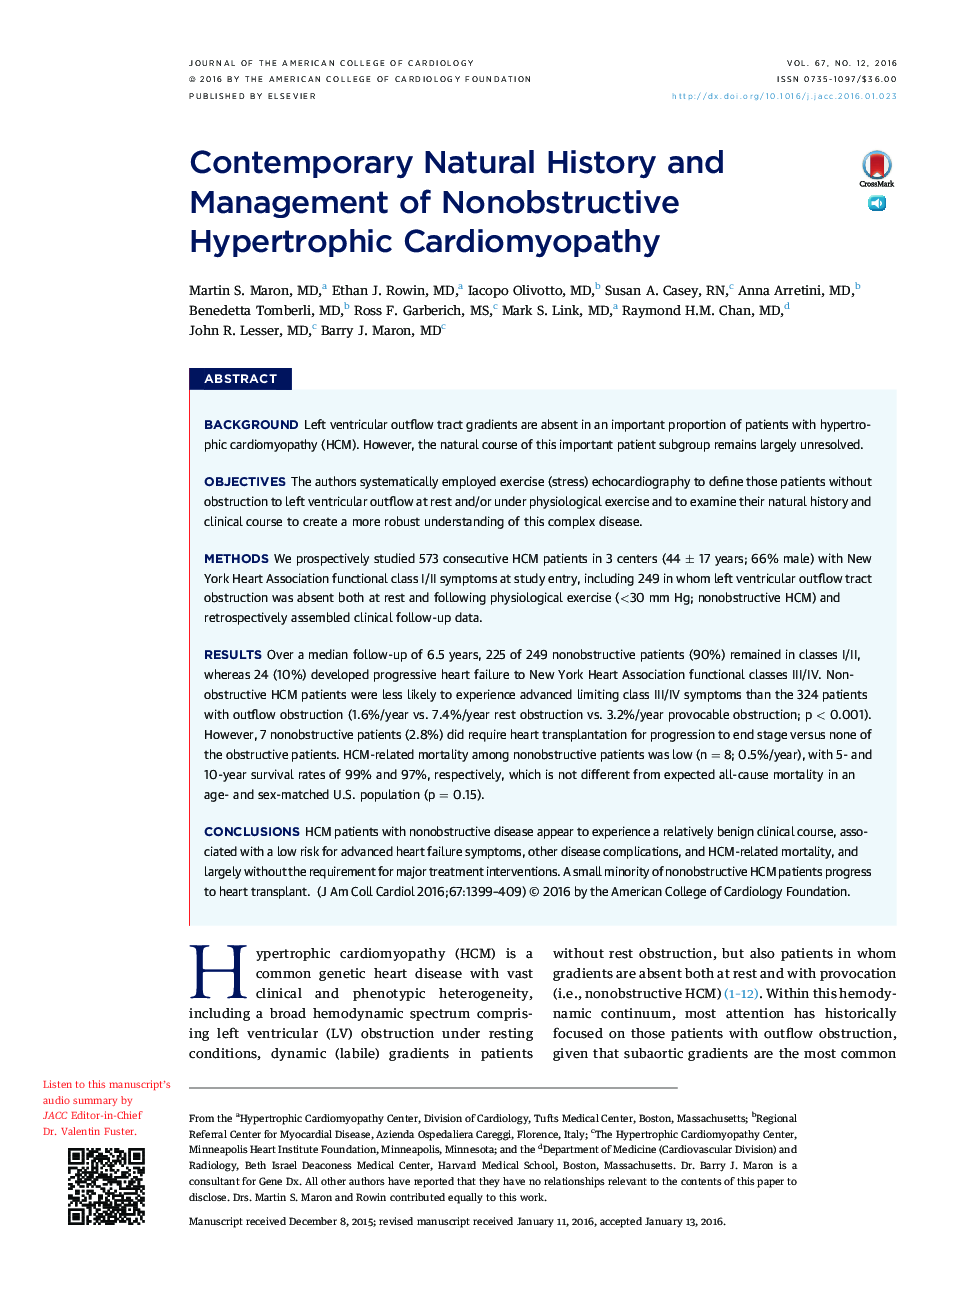 Contemporary Natural History and Management of Nonobstructive Hypertrophic Cardiomyopathy